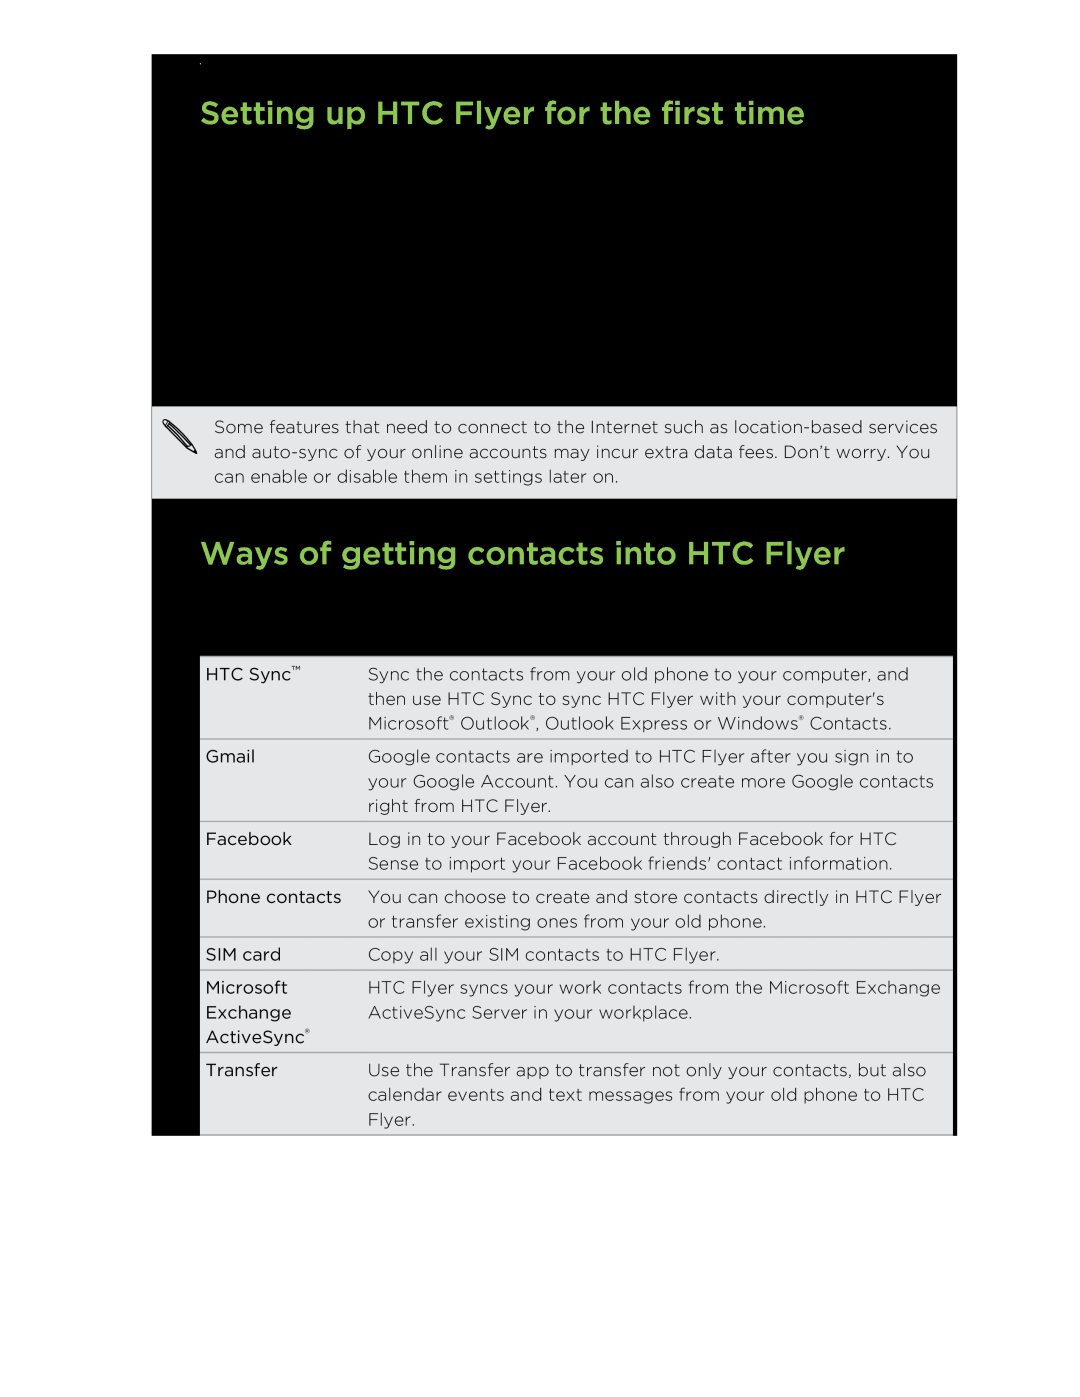 HTC HTCFlyerP512 manual Setting up HTC Flyer for the first time, Ways of getting contacts into HTC Flyer 